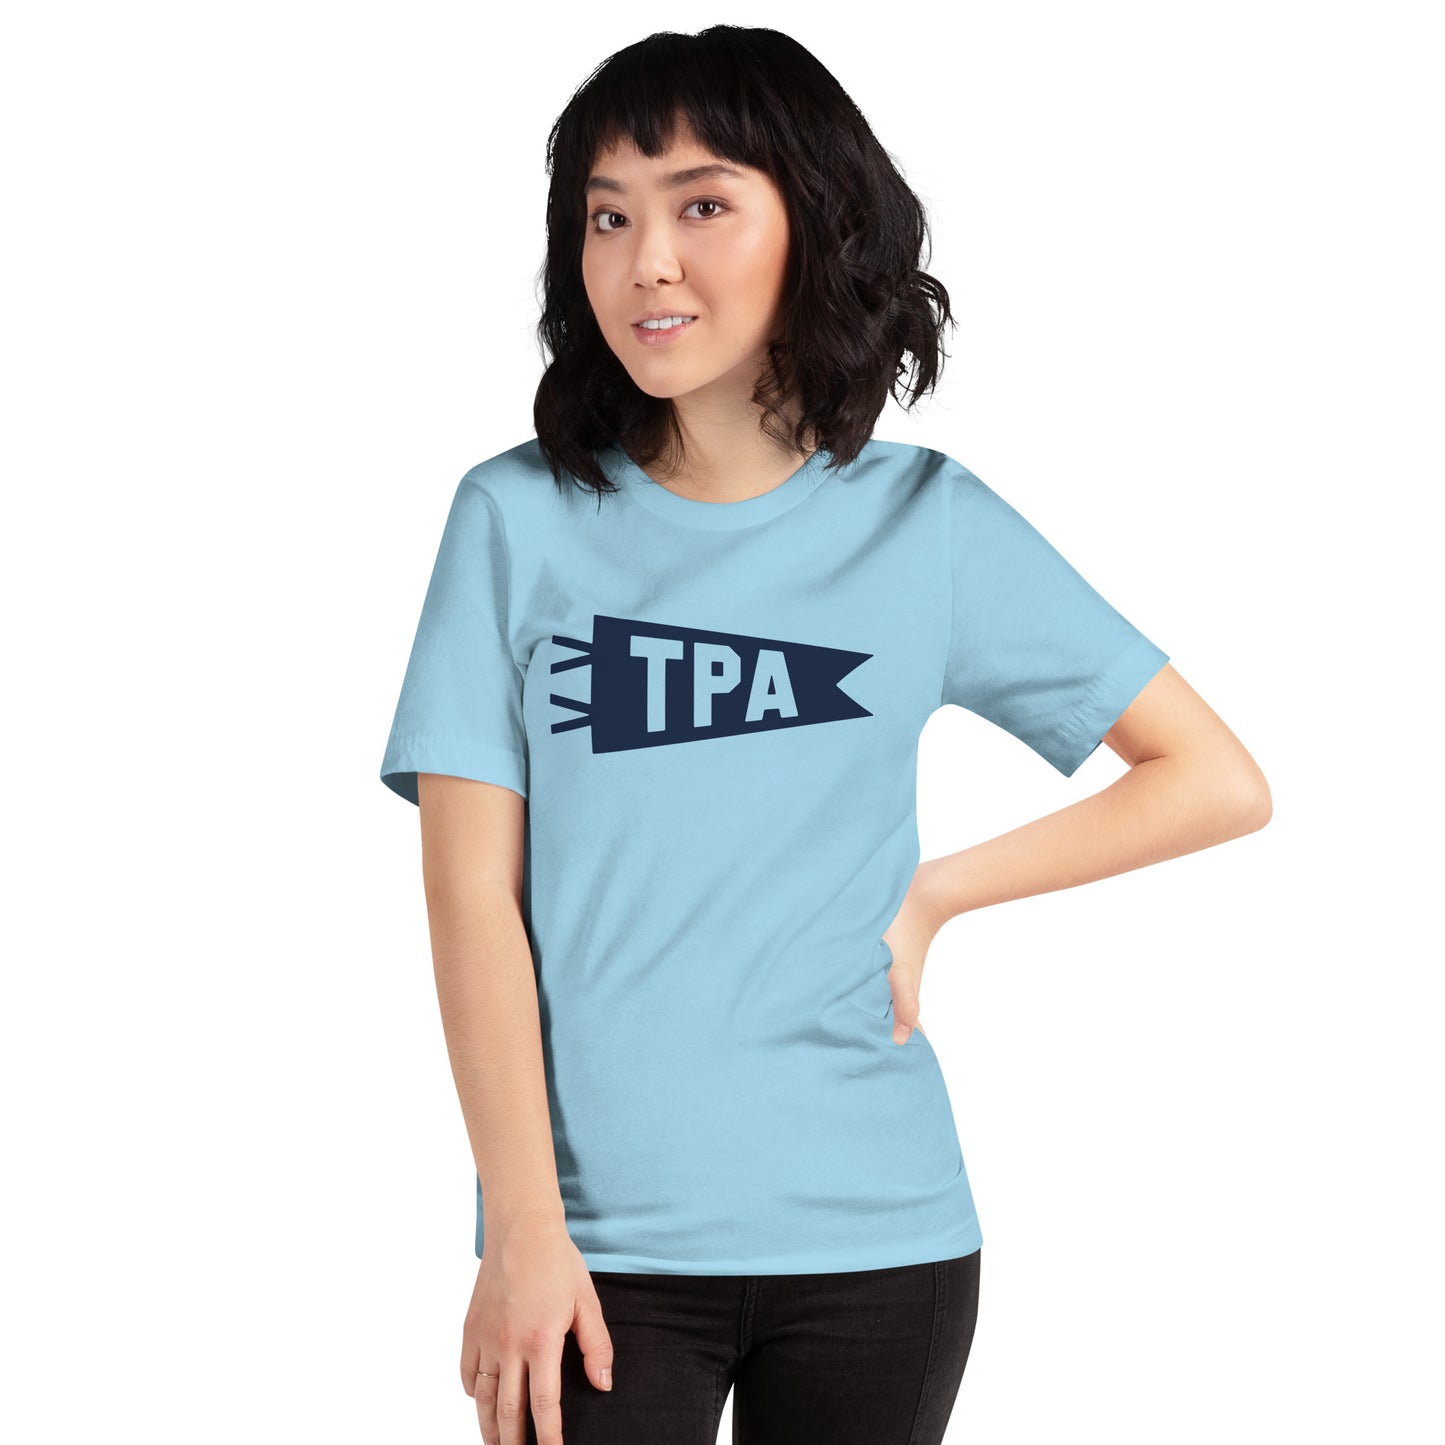 Airport Code T-Shirt - Navy Blue Graphic • TPA Tampa • YHM Designs - Image 09